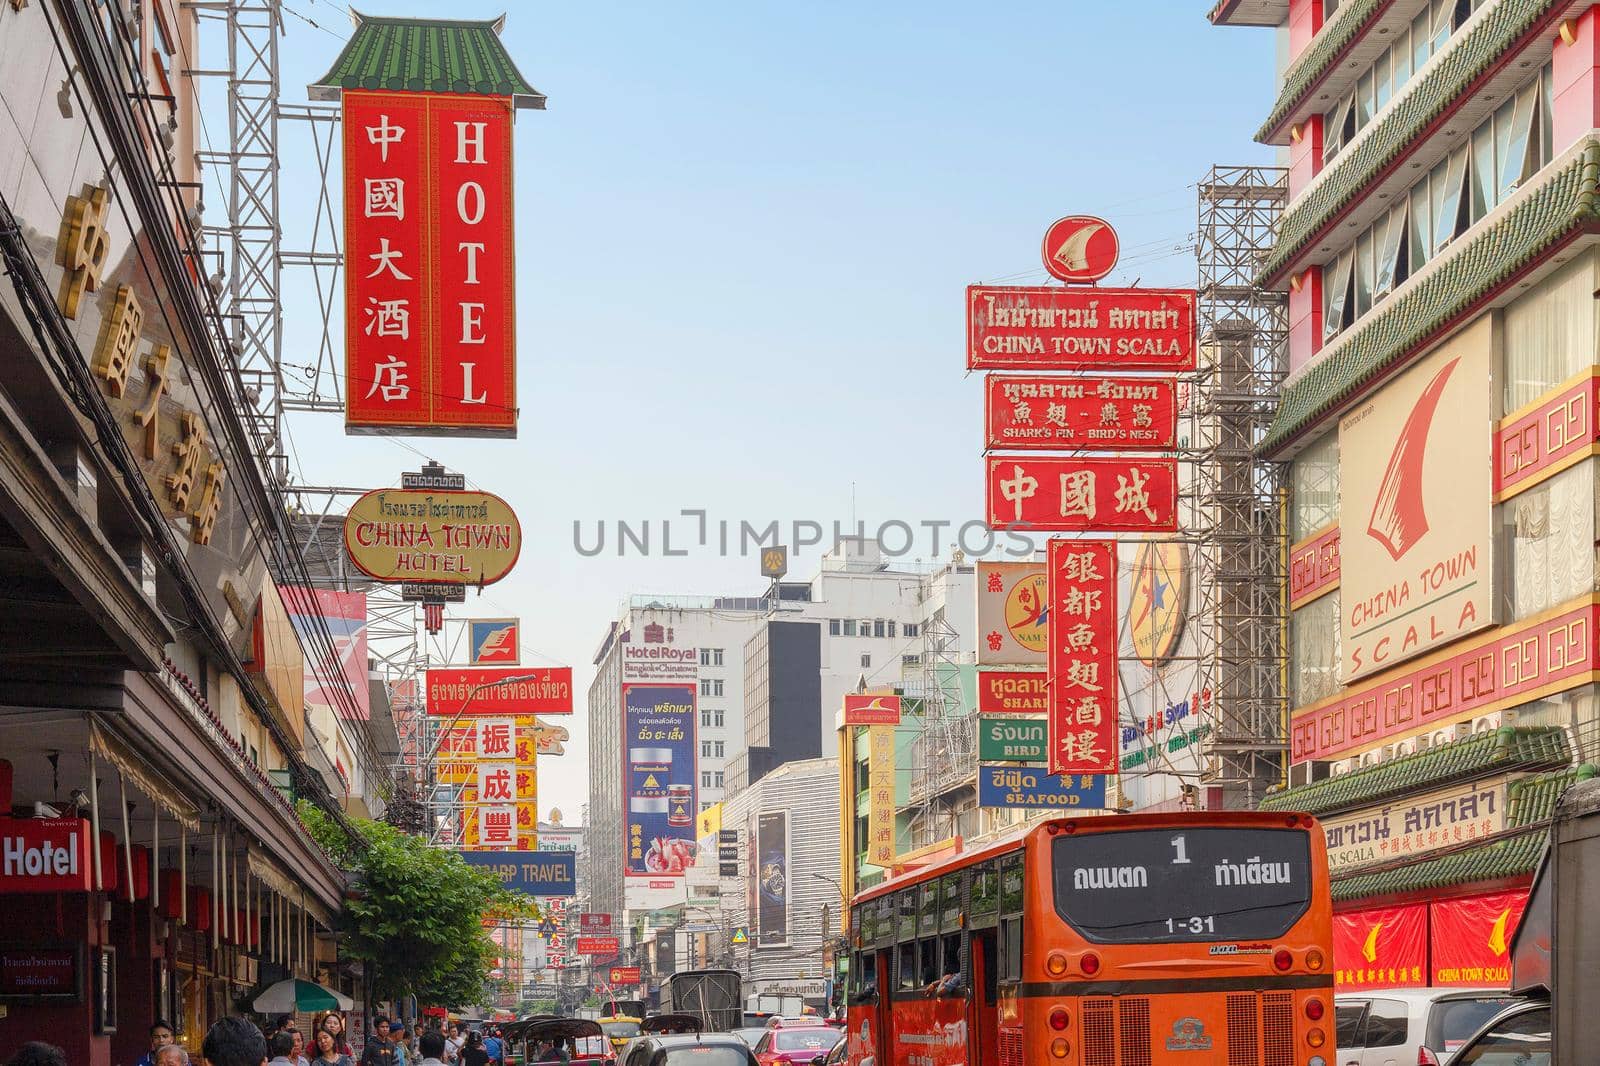 The main street of Chinatown in Bangkok by samarttiw